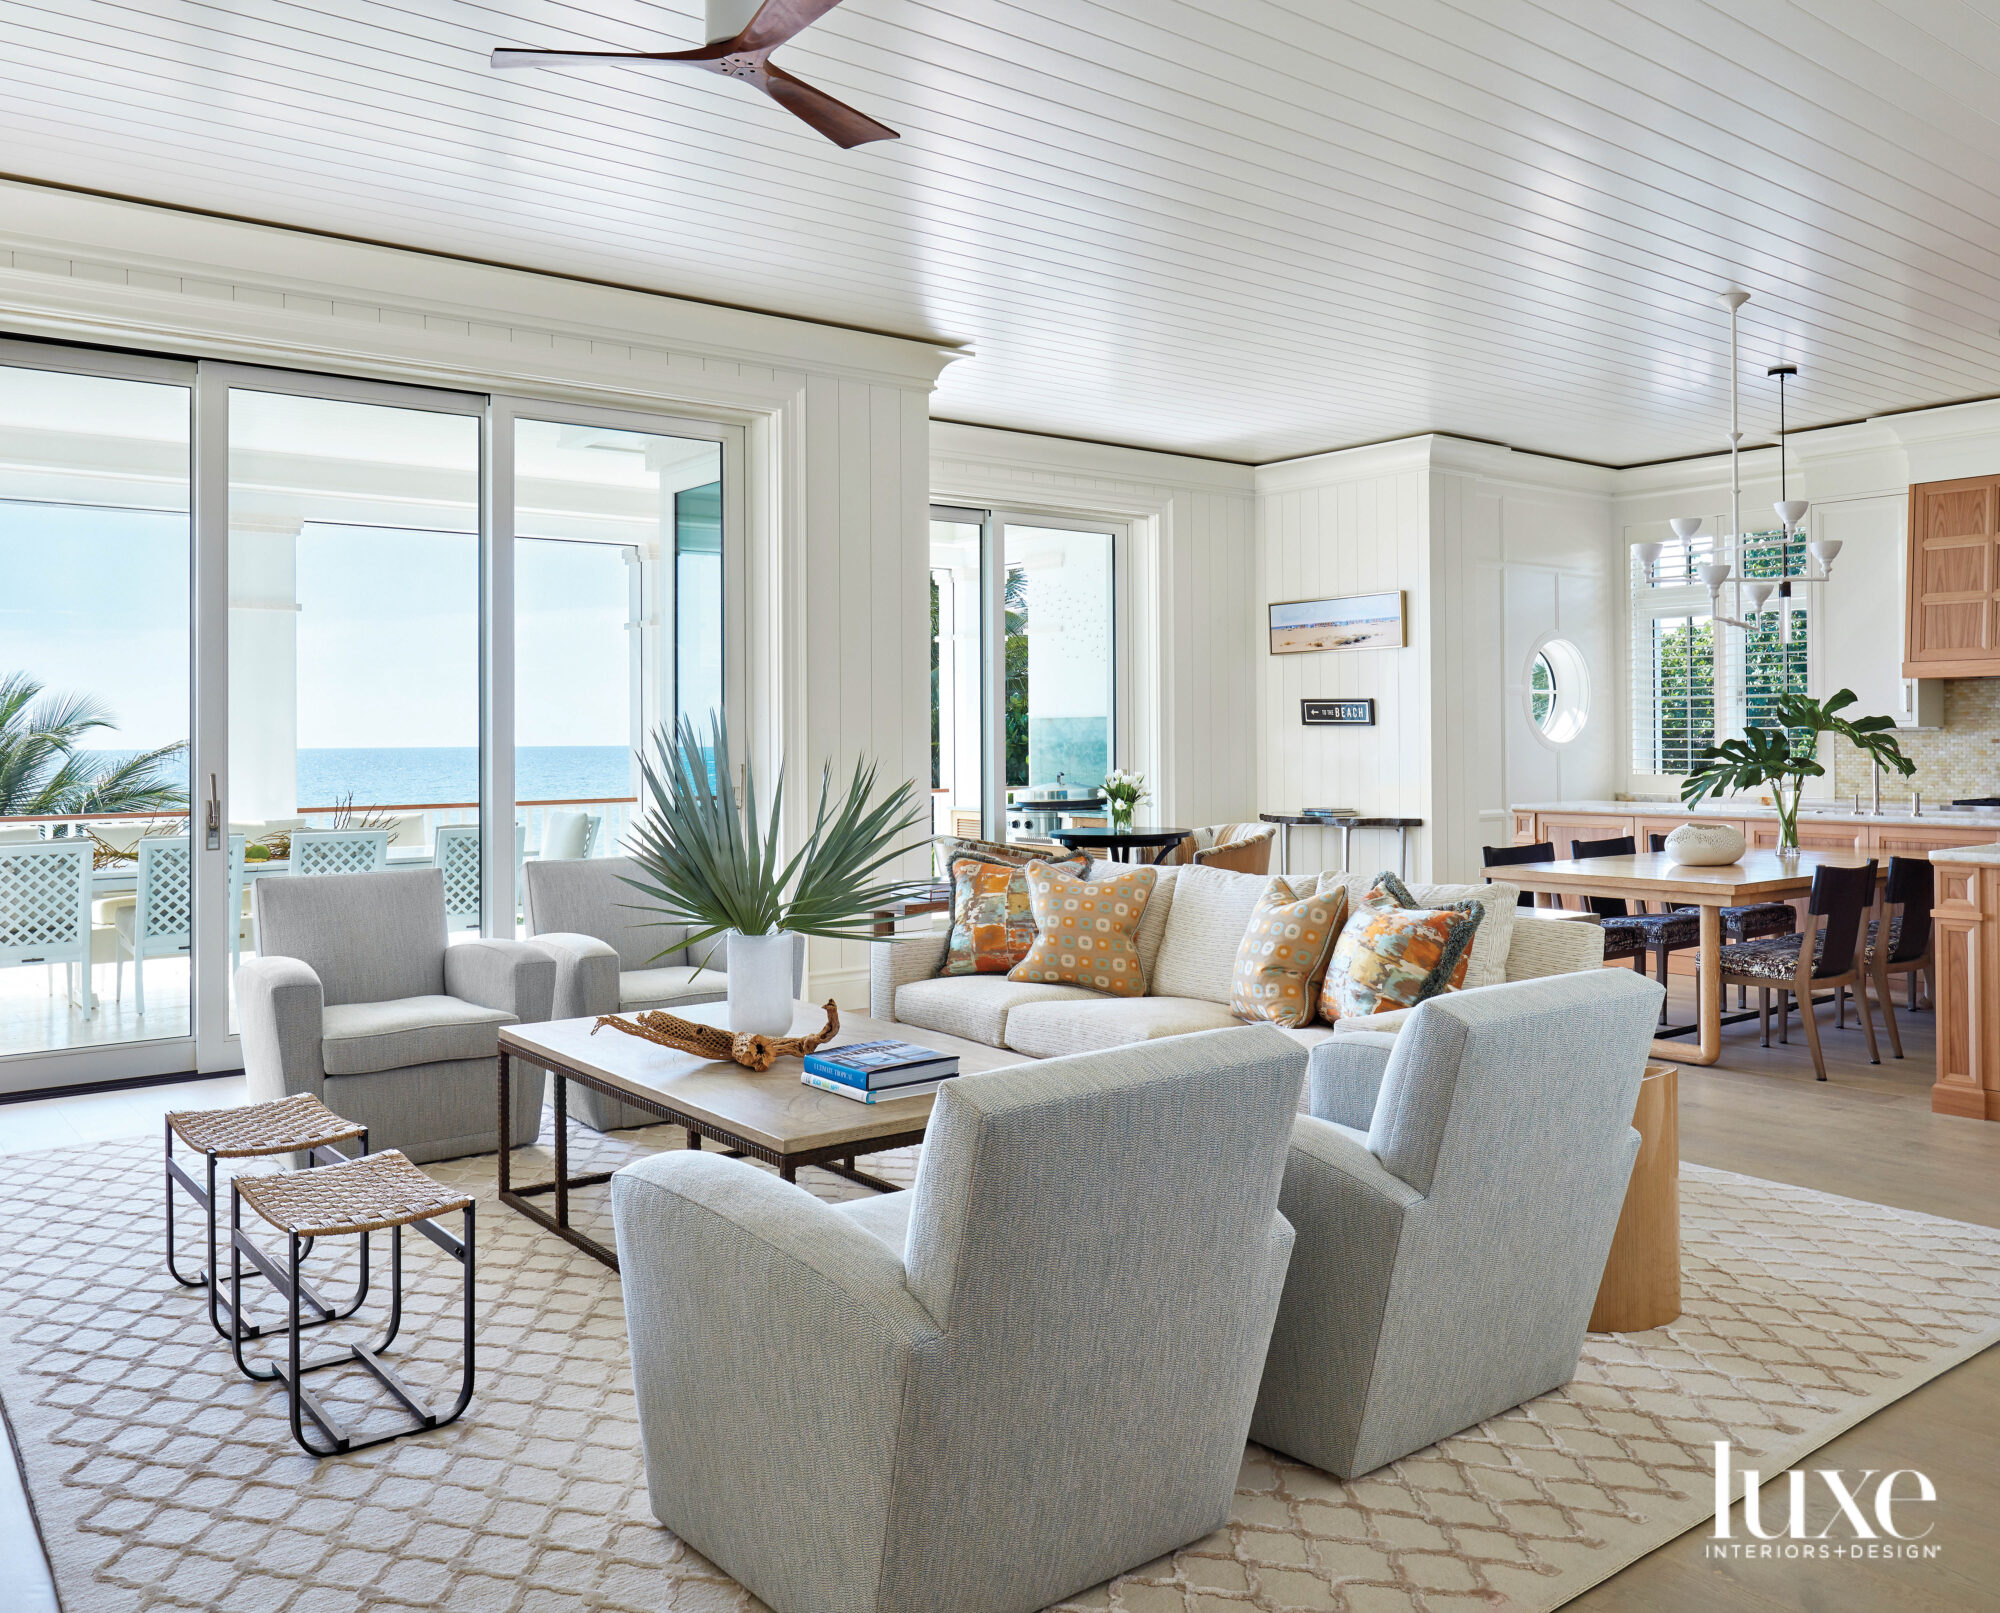 Living area with gray armchairs with ocean views.